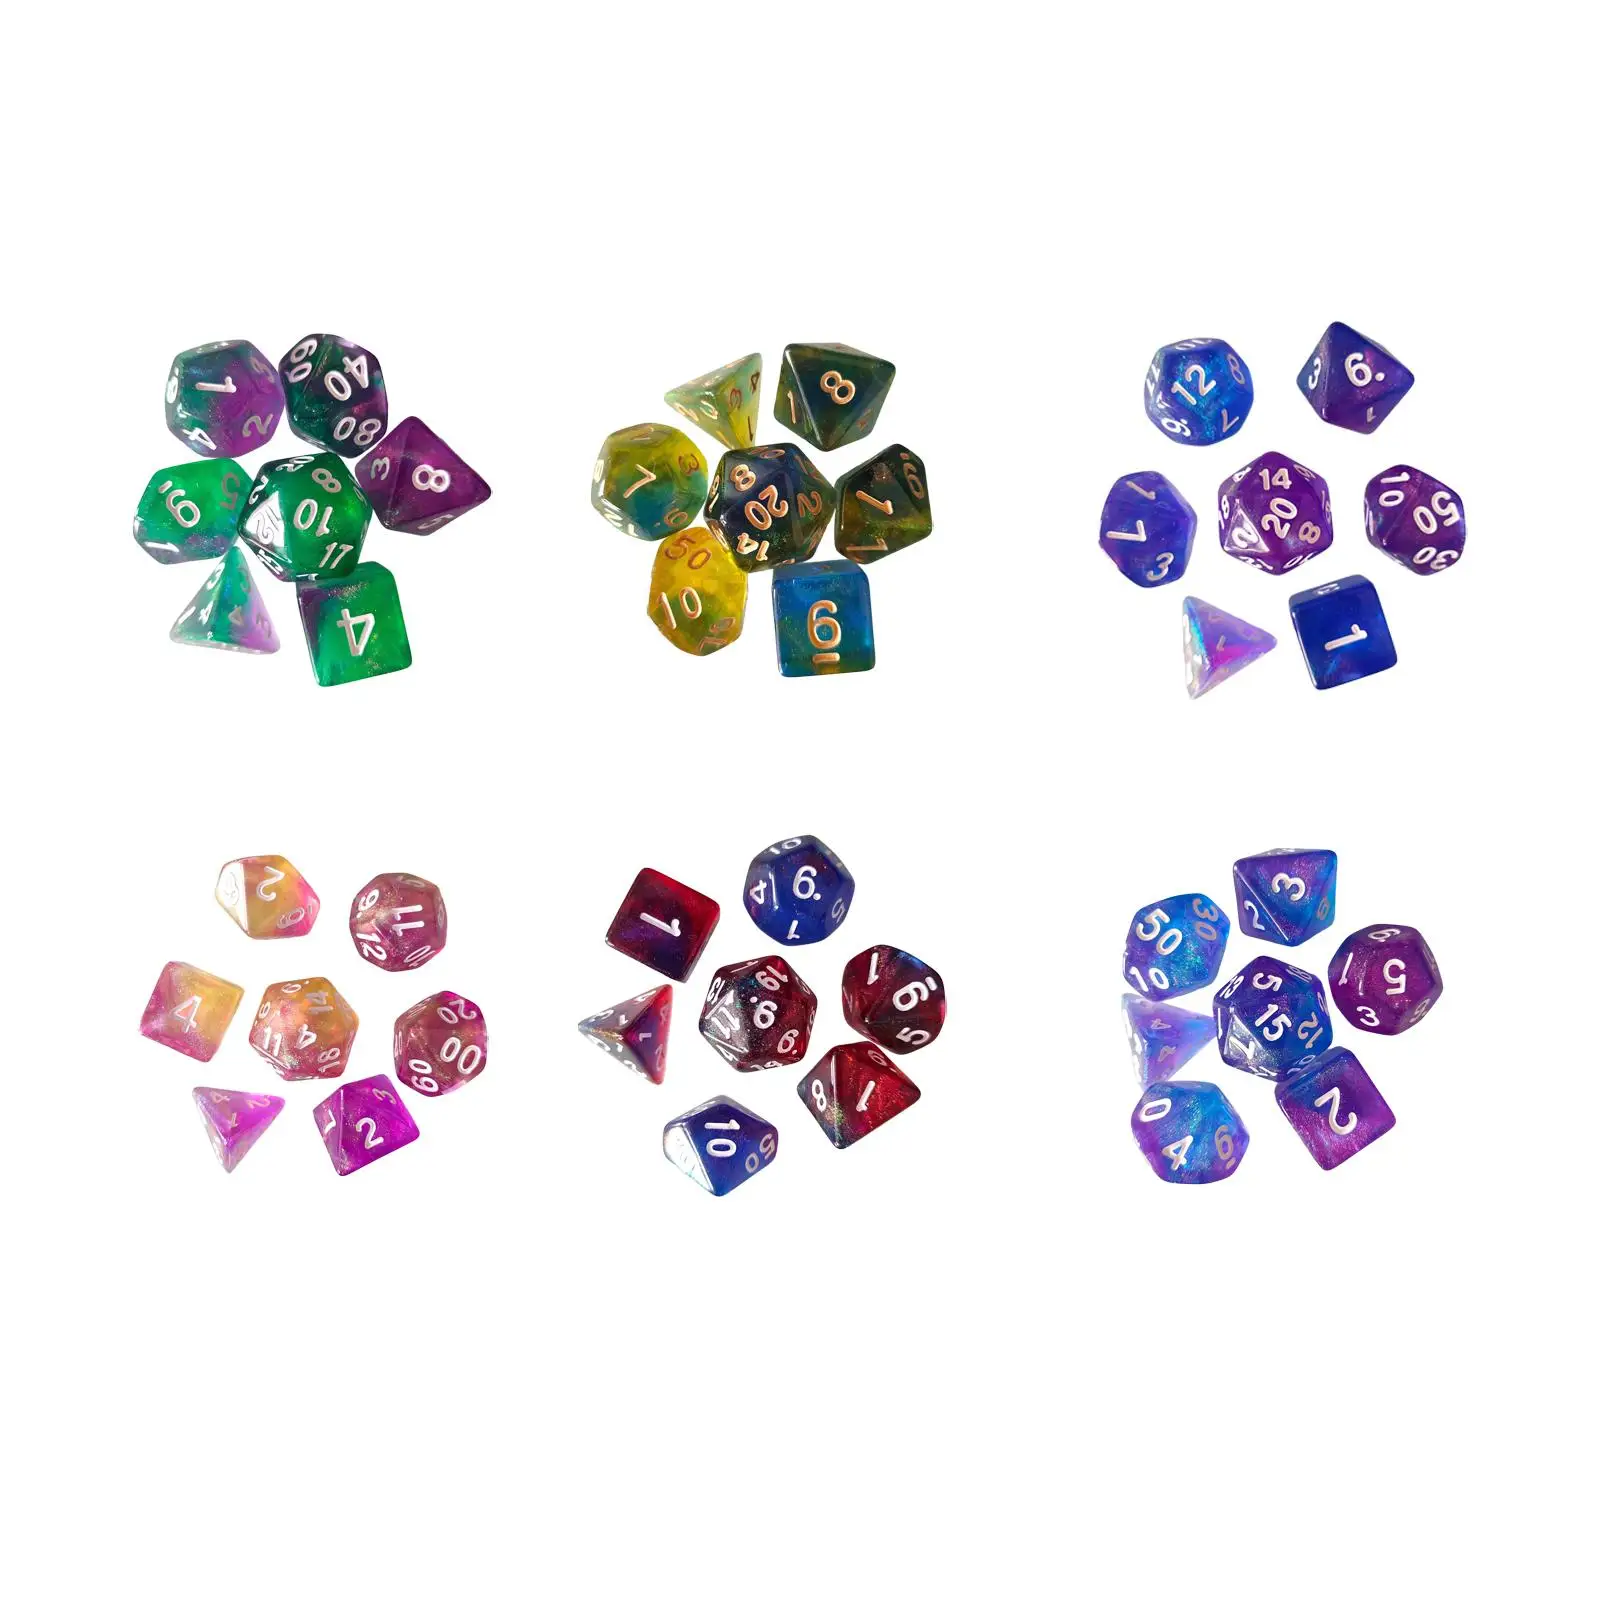 7PCS Acrylic Polyhedral Dices Set D4-D20 Multicolour Dices Math Teaching Assortment for TCG Role Playing Table Game Card Games